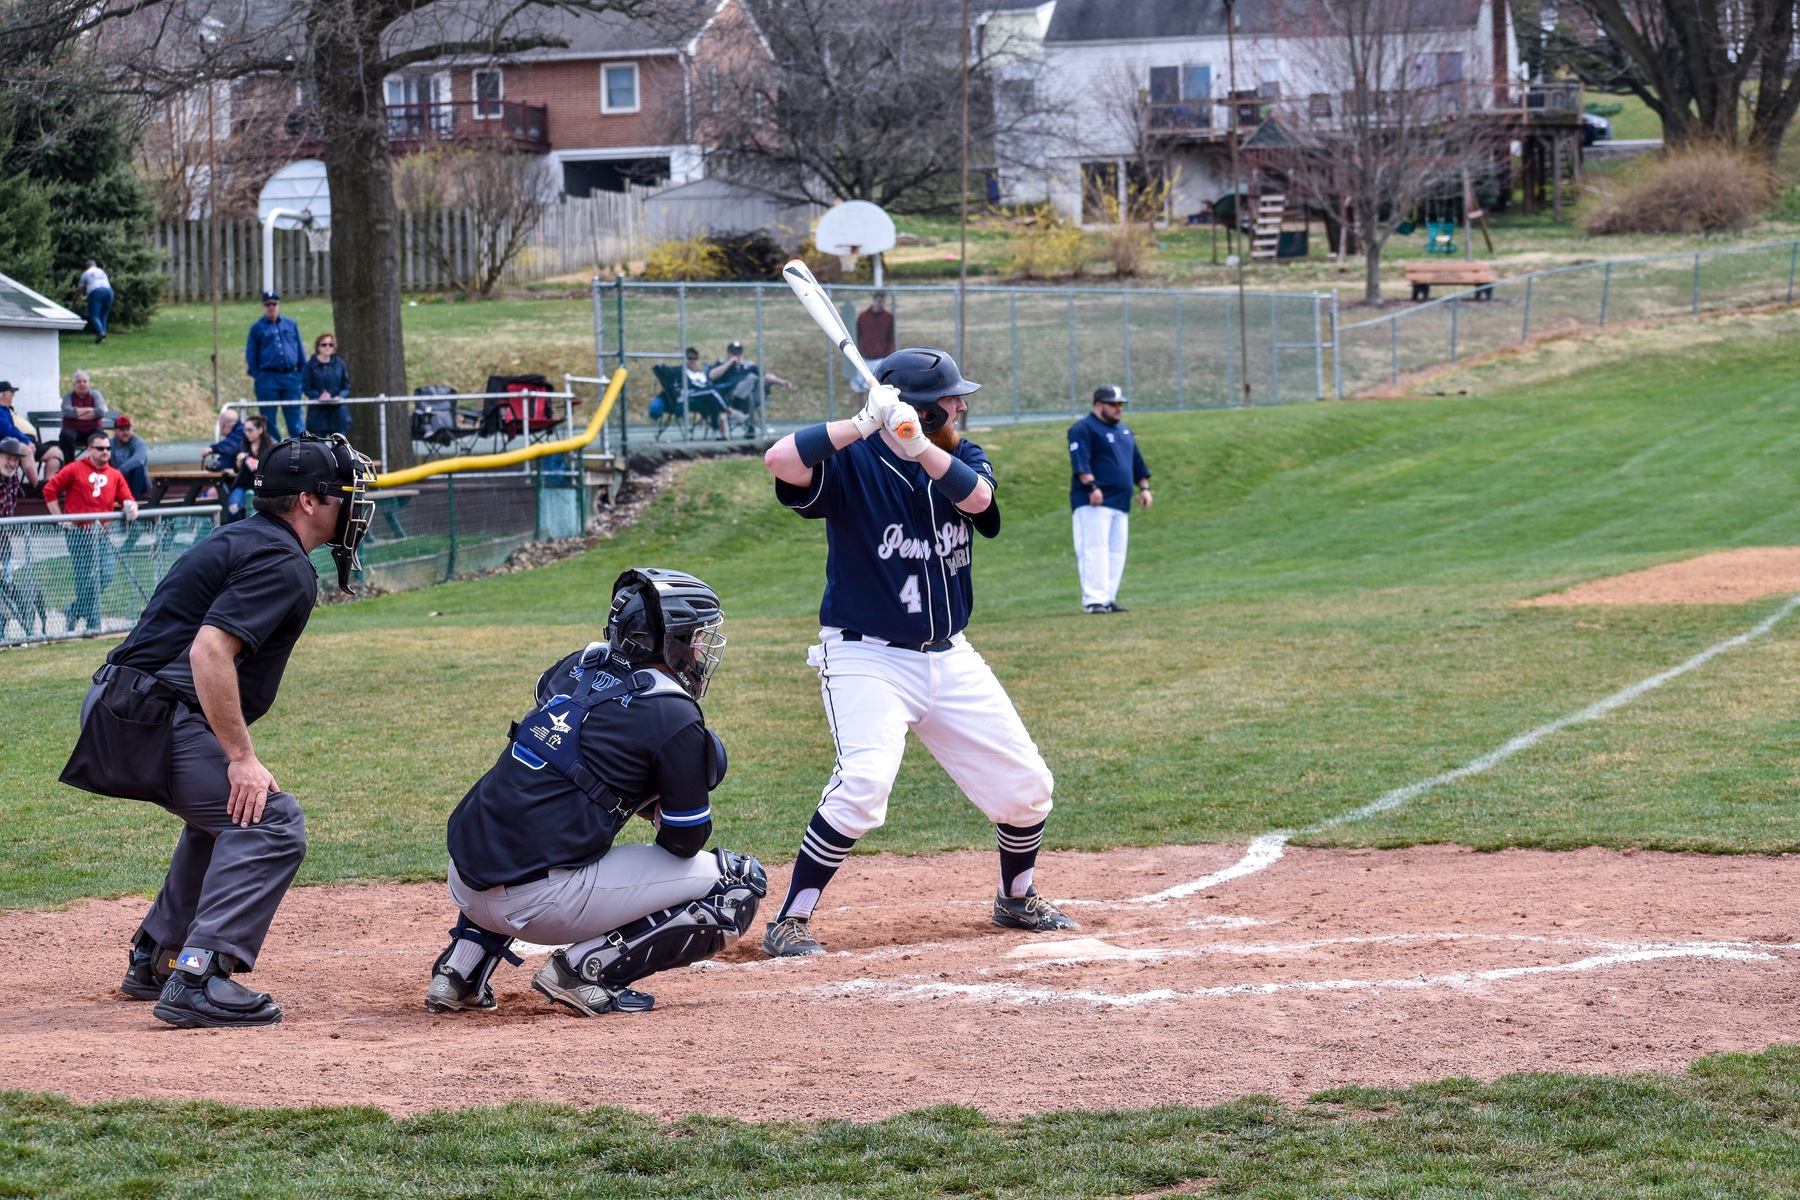 Brady Lefever hit a solo home run in the 12-2 victory for Penn State York.